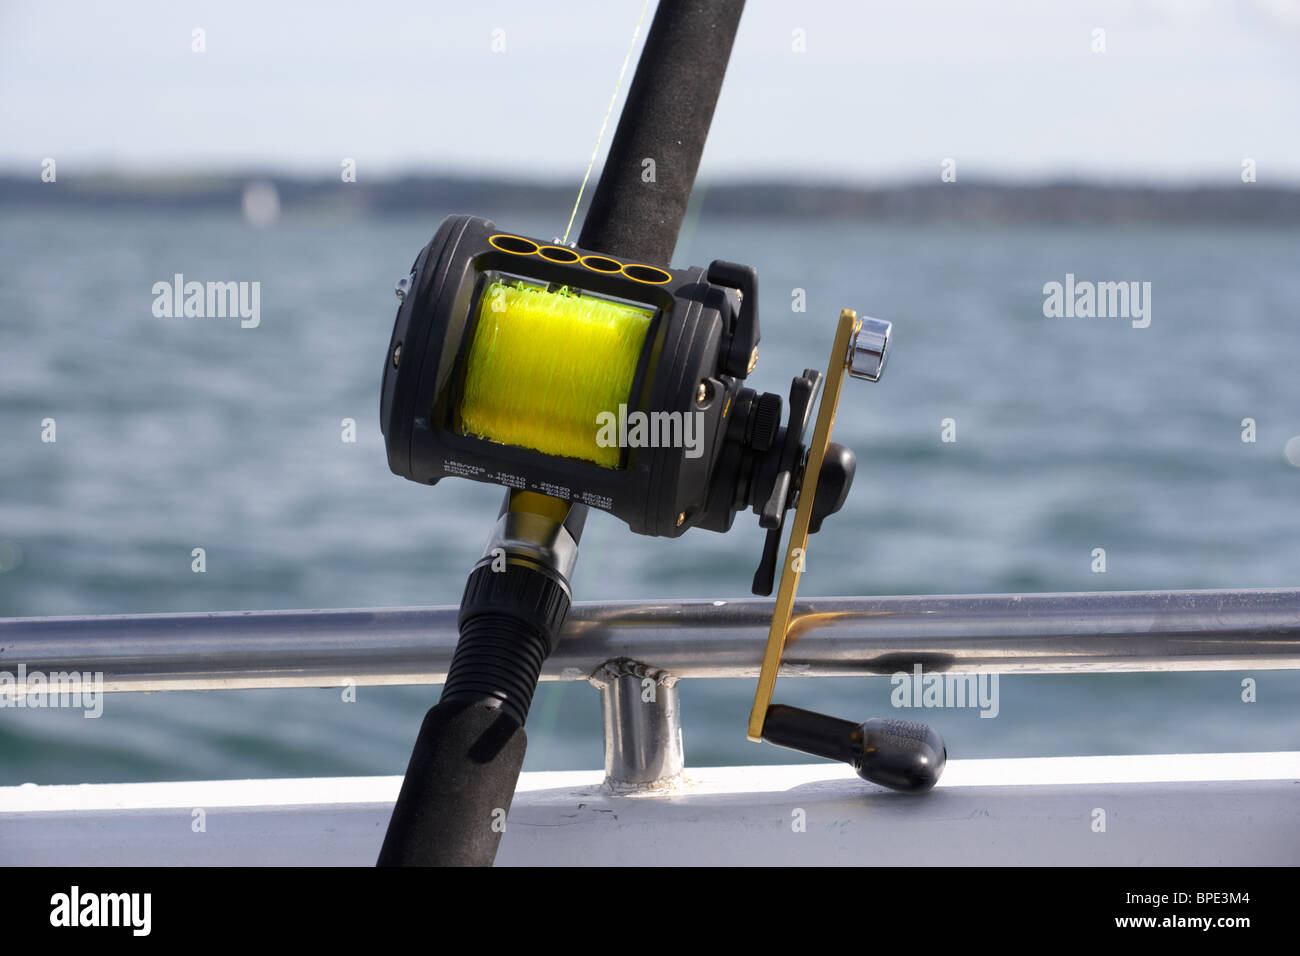 sea fishing on a boat with rod and multiplier reel Stock Photo - Alamy